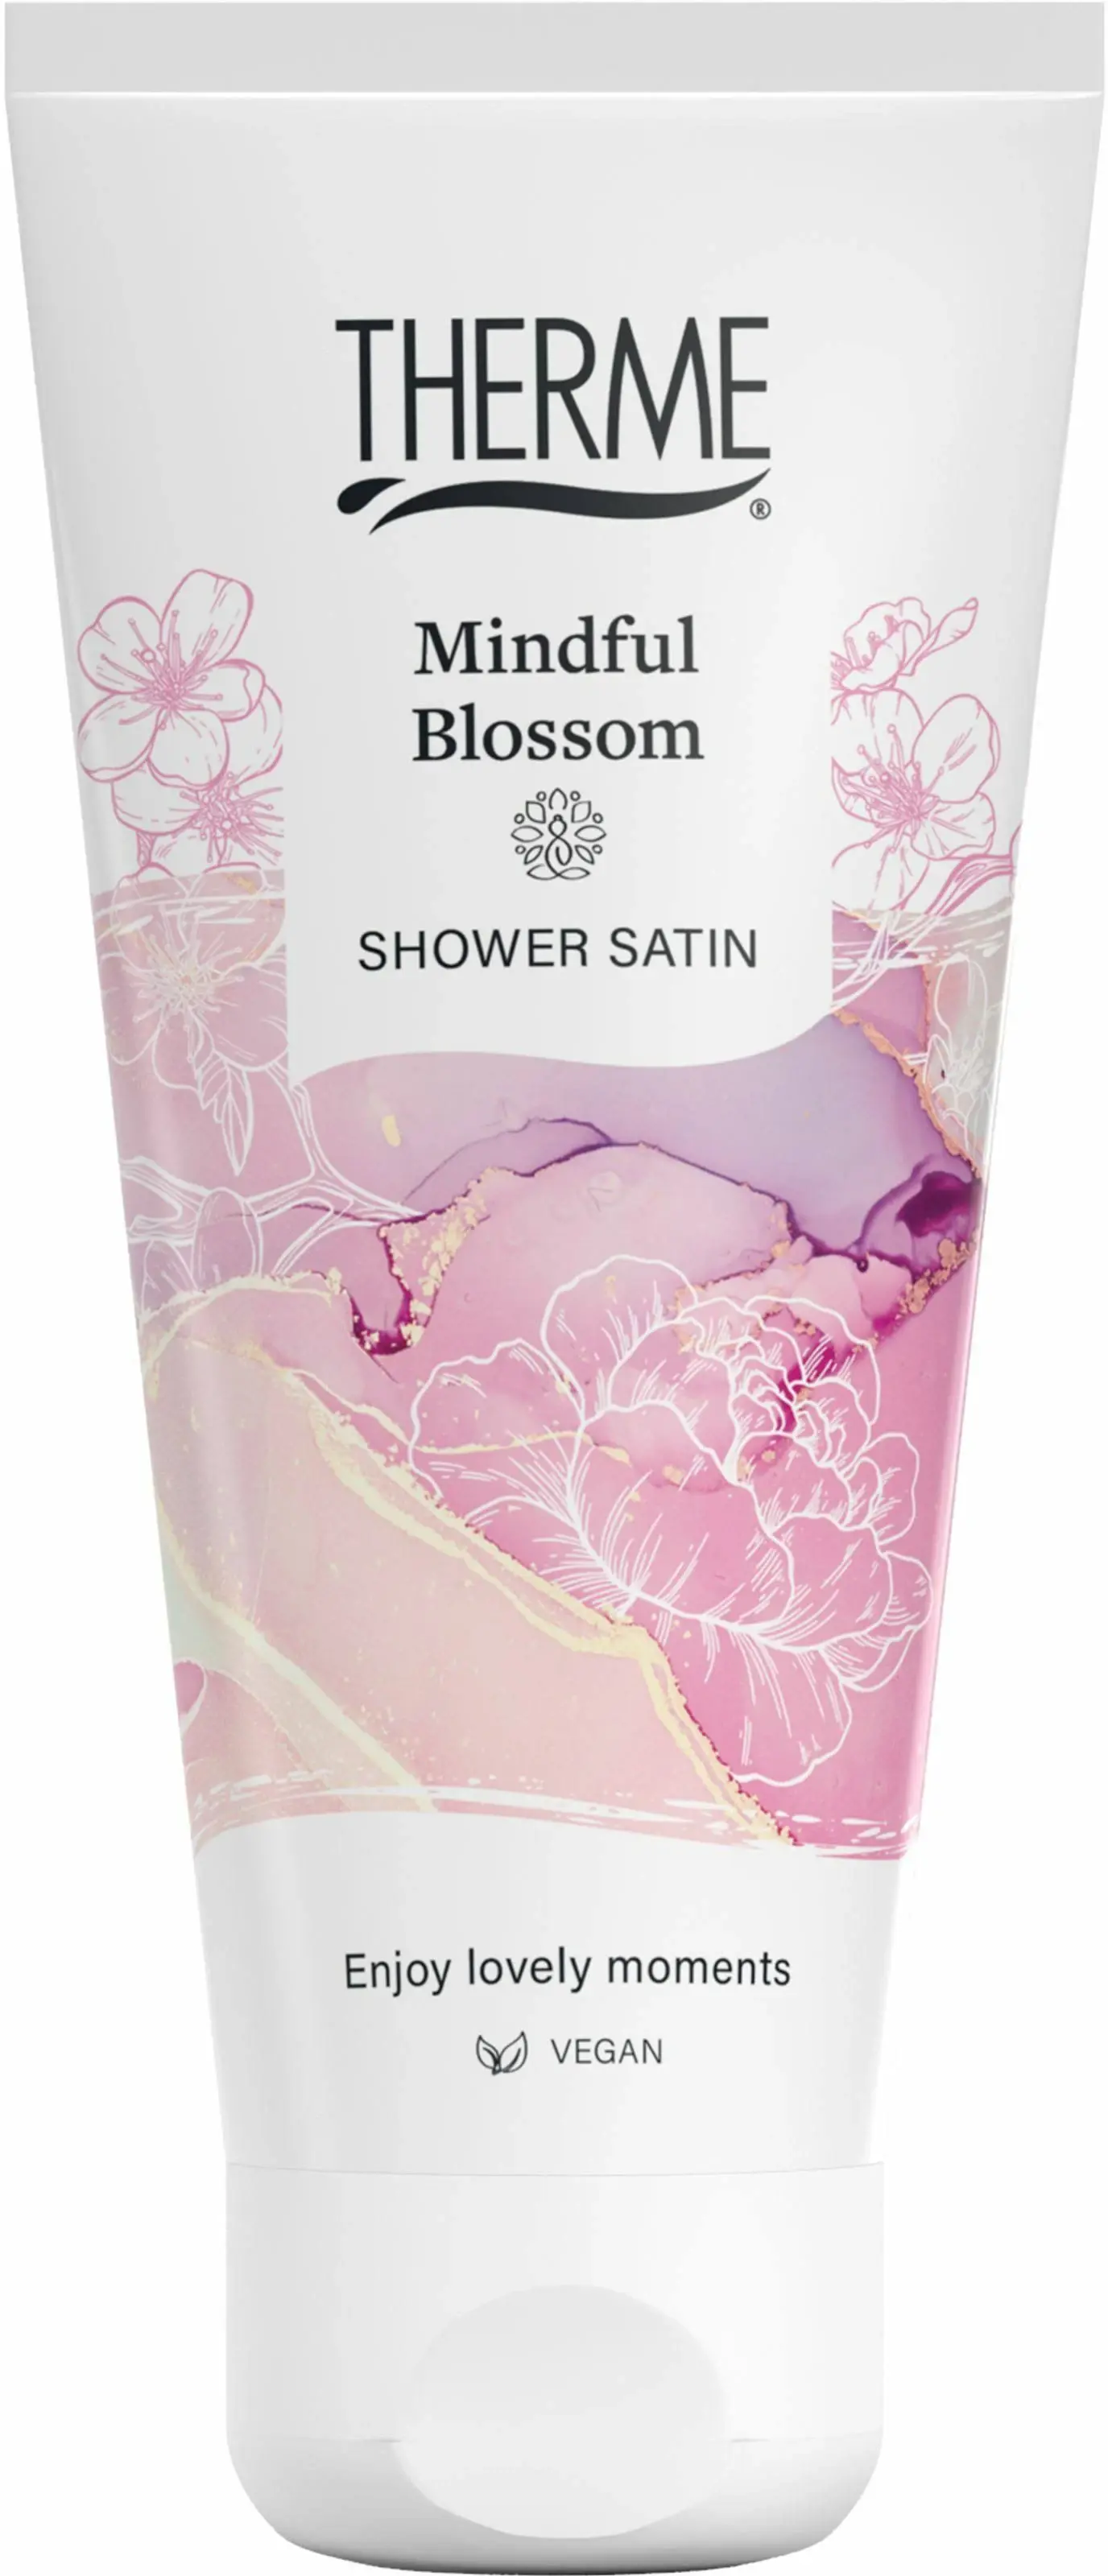 Therme Mindful Blossom Shower Satin (200 ml)